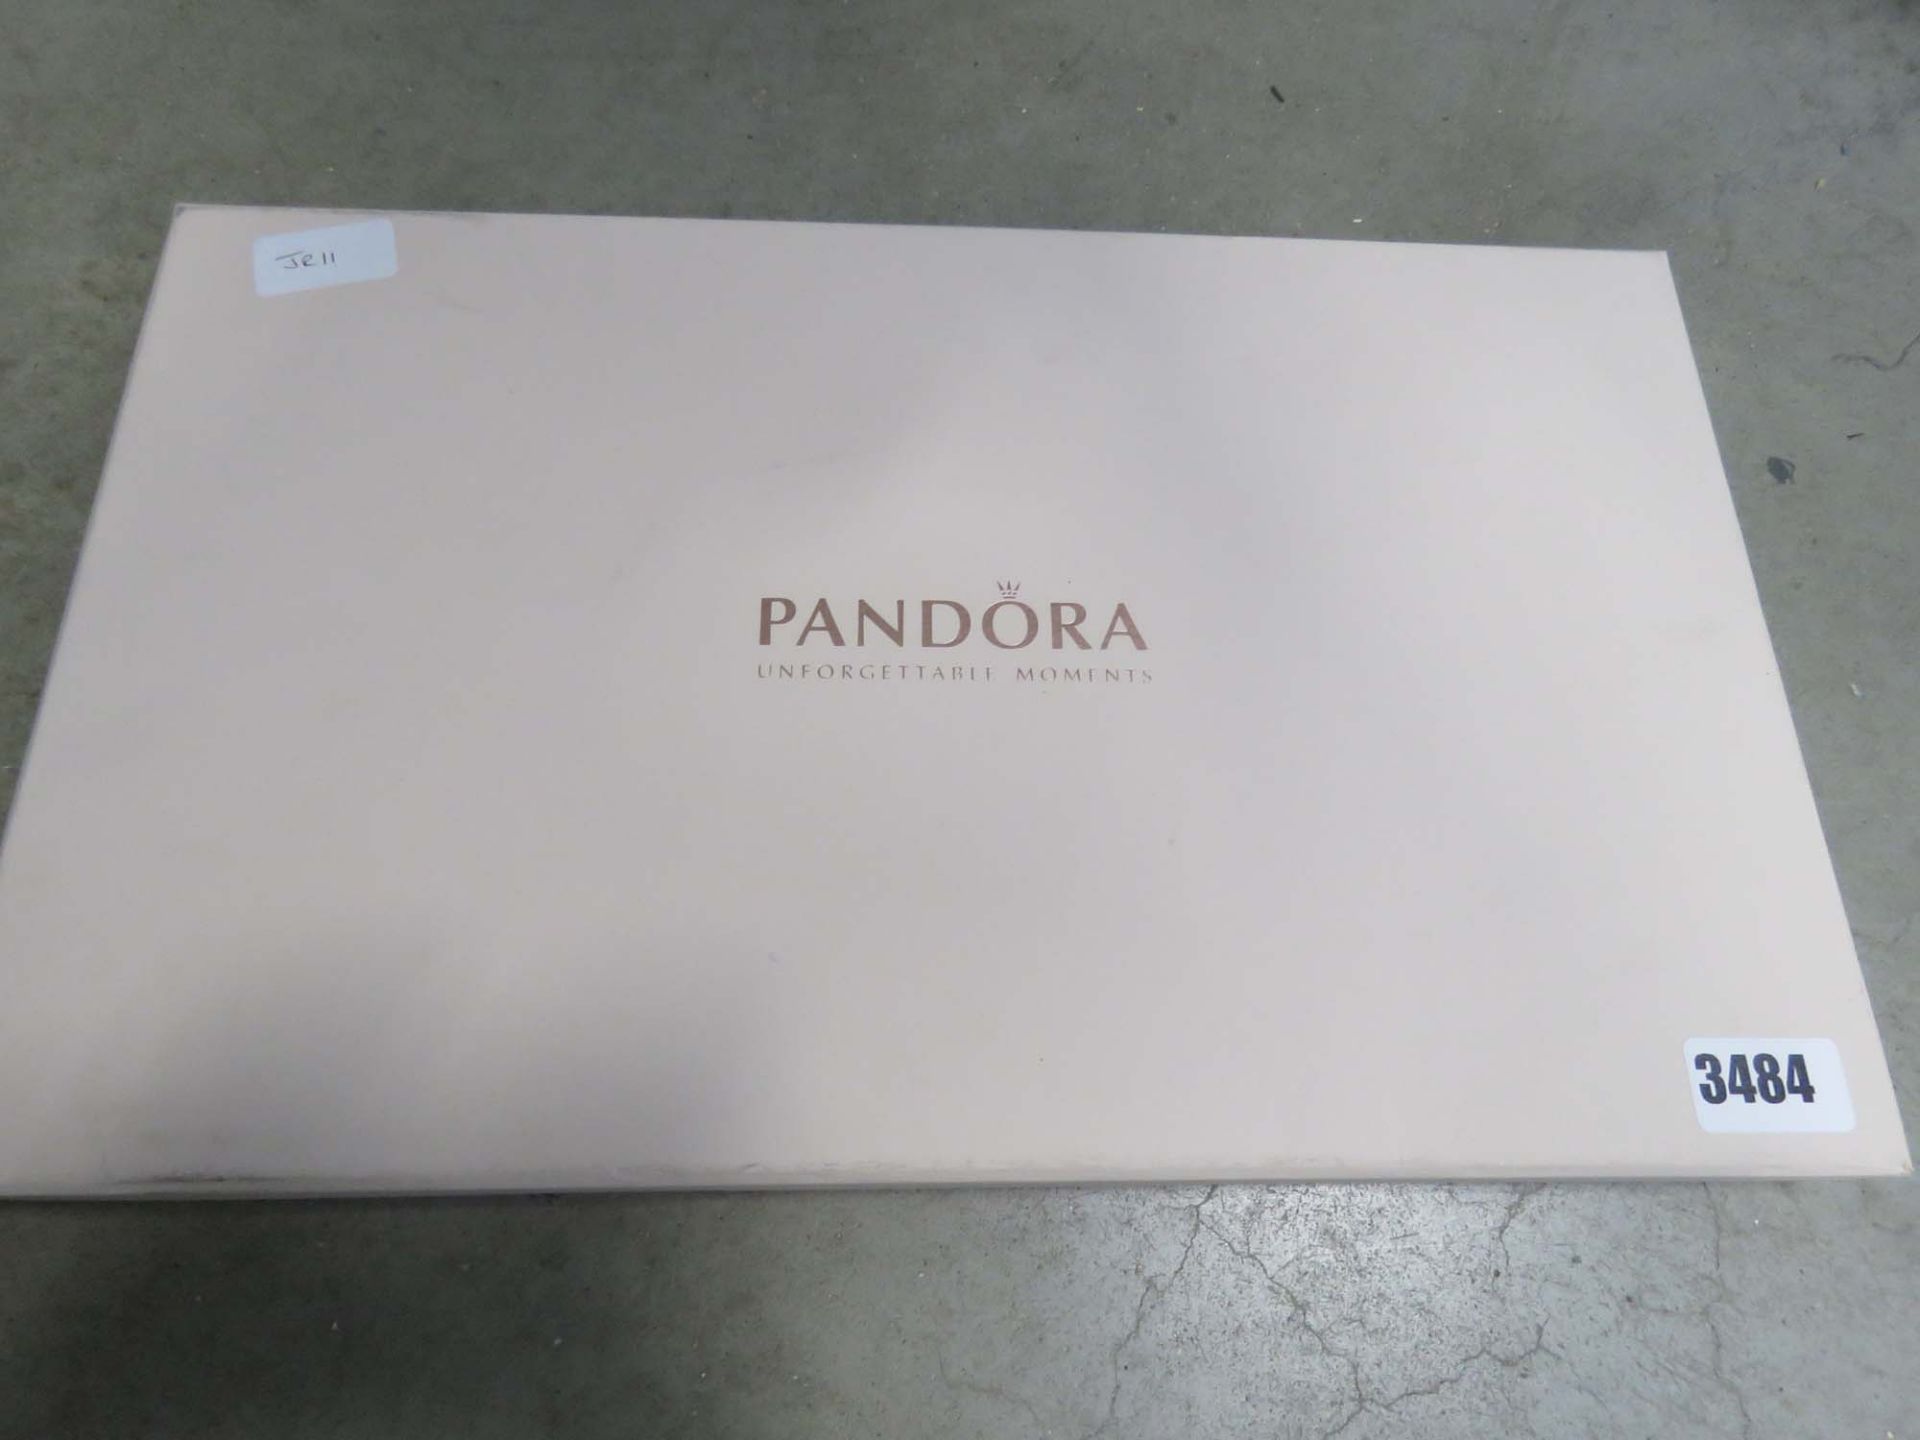 Pandora Unforgettable moments picture frame in box - Image 2 of 2